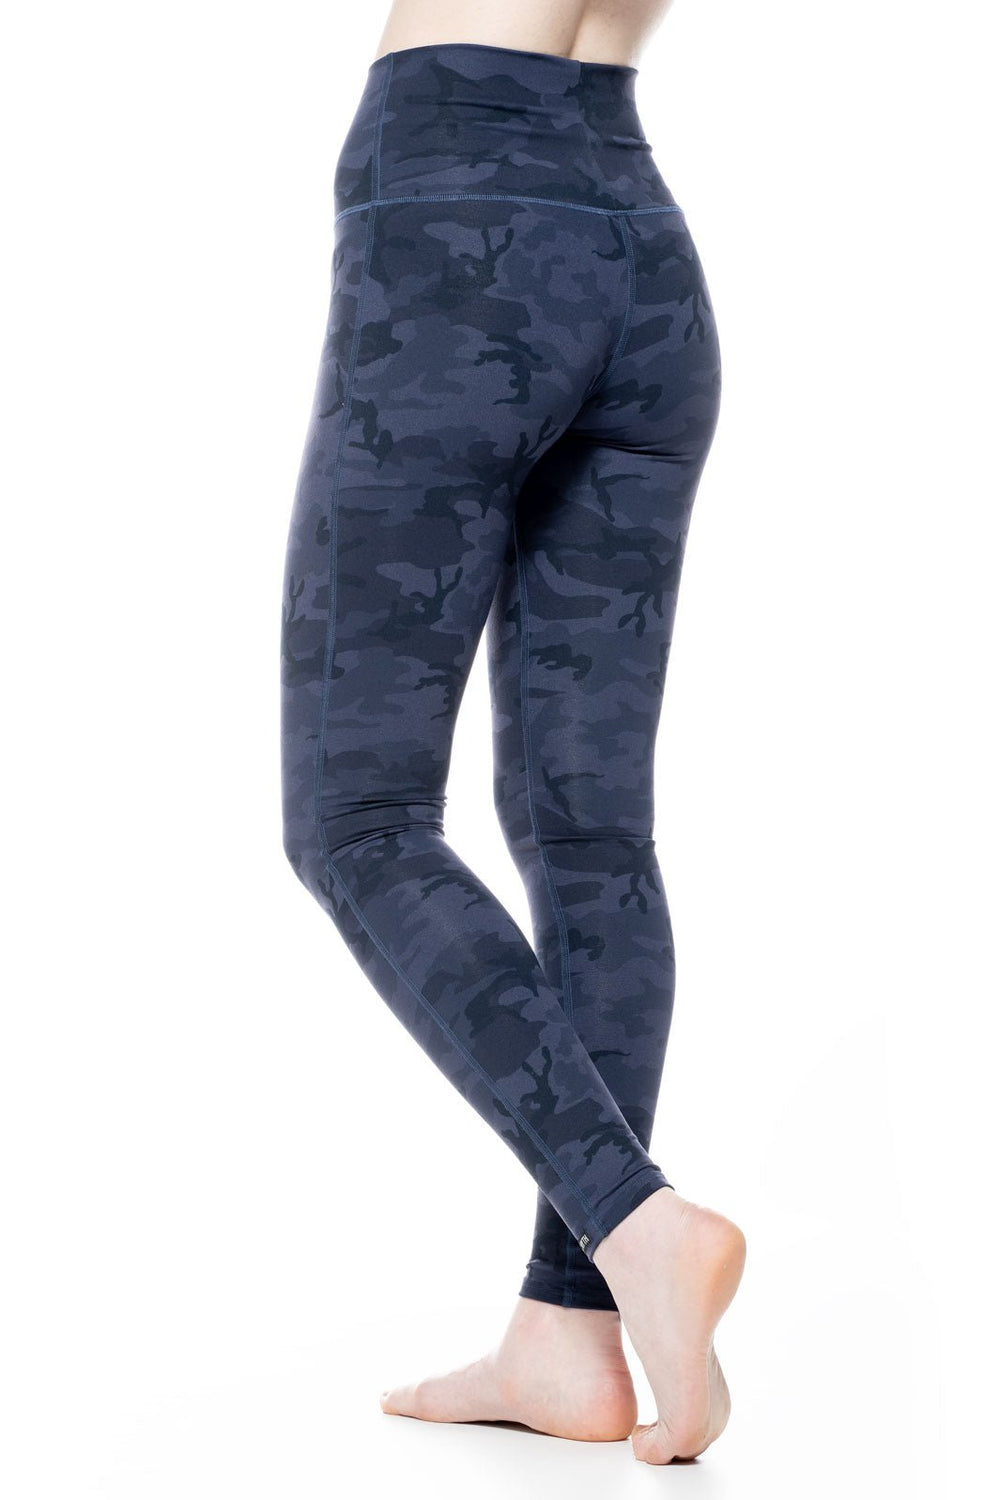 Side view fo the high waist blue camouflage leggings 